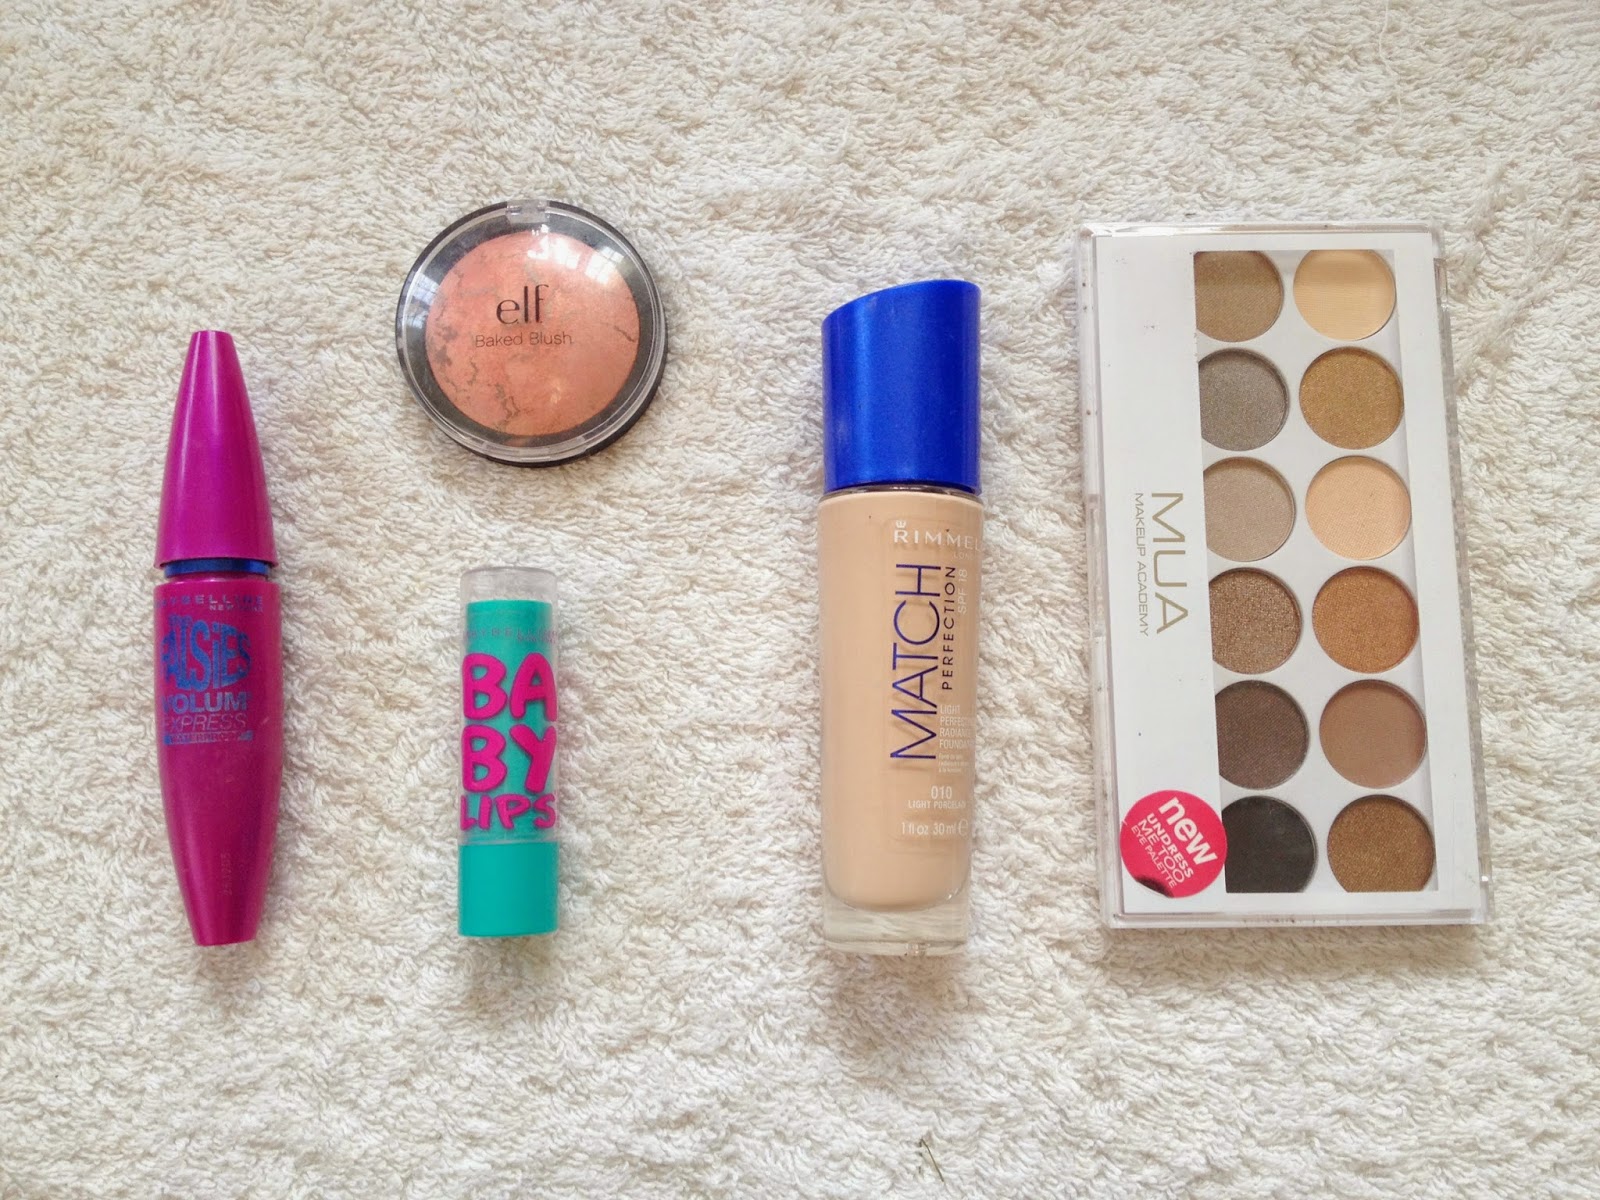 5 Product Face Tag featuring Maybelline, MUA, Rimmel and elf